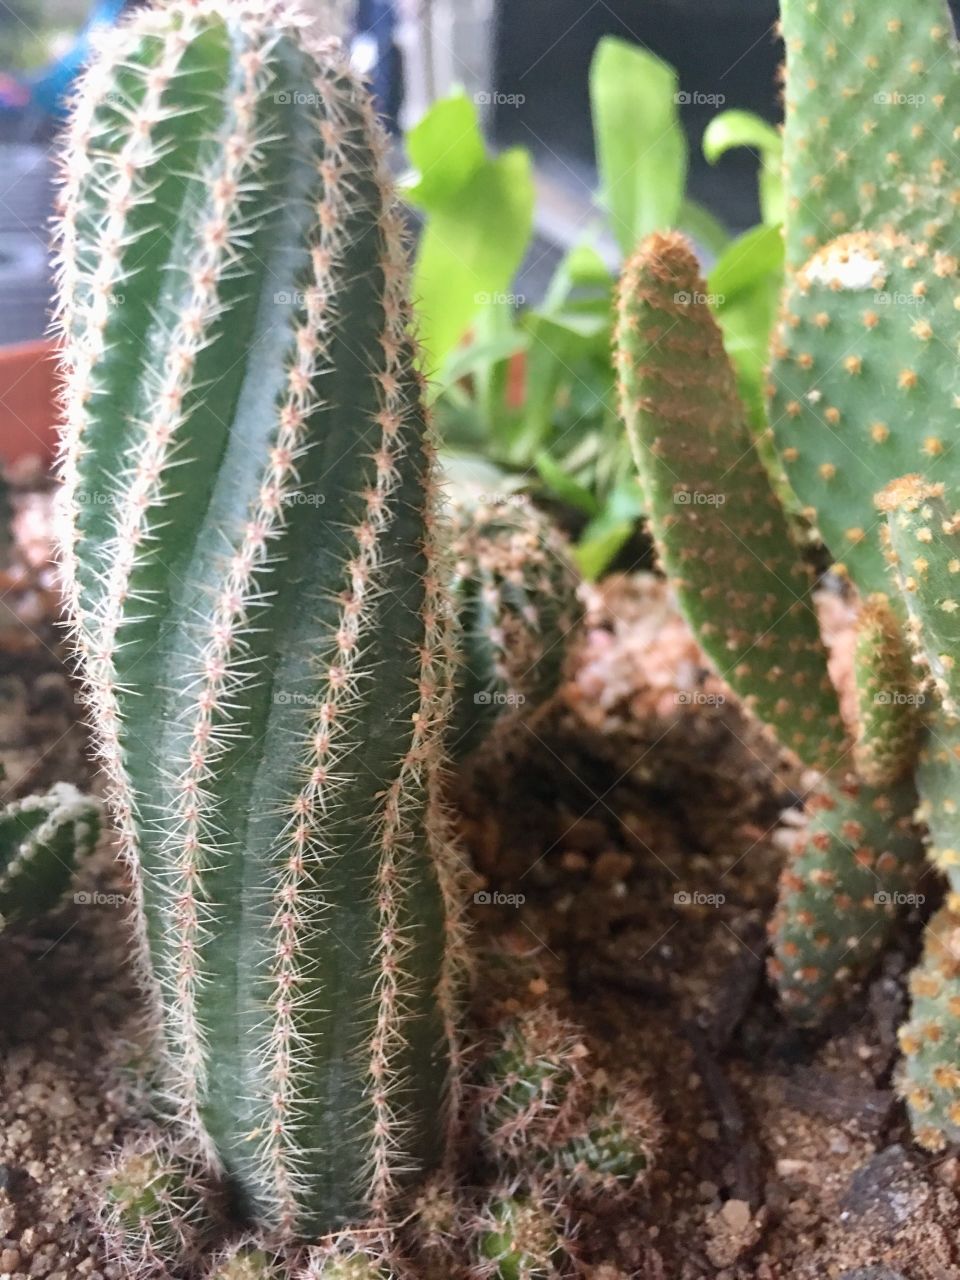 Cactus in the pot of the son